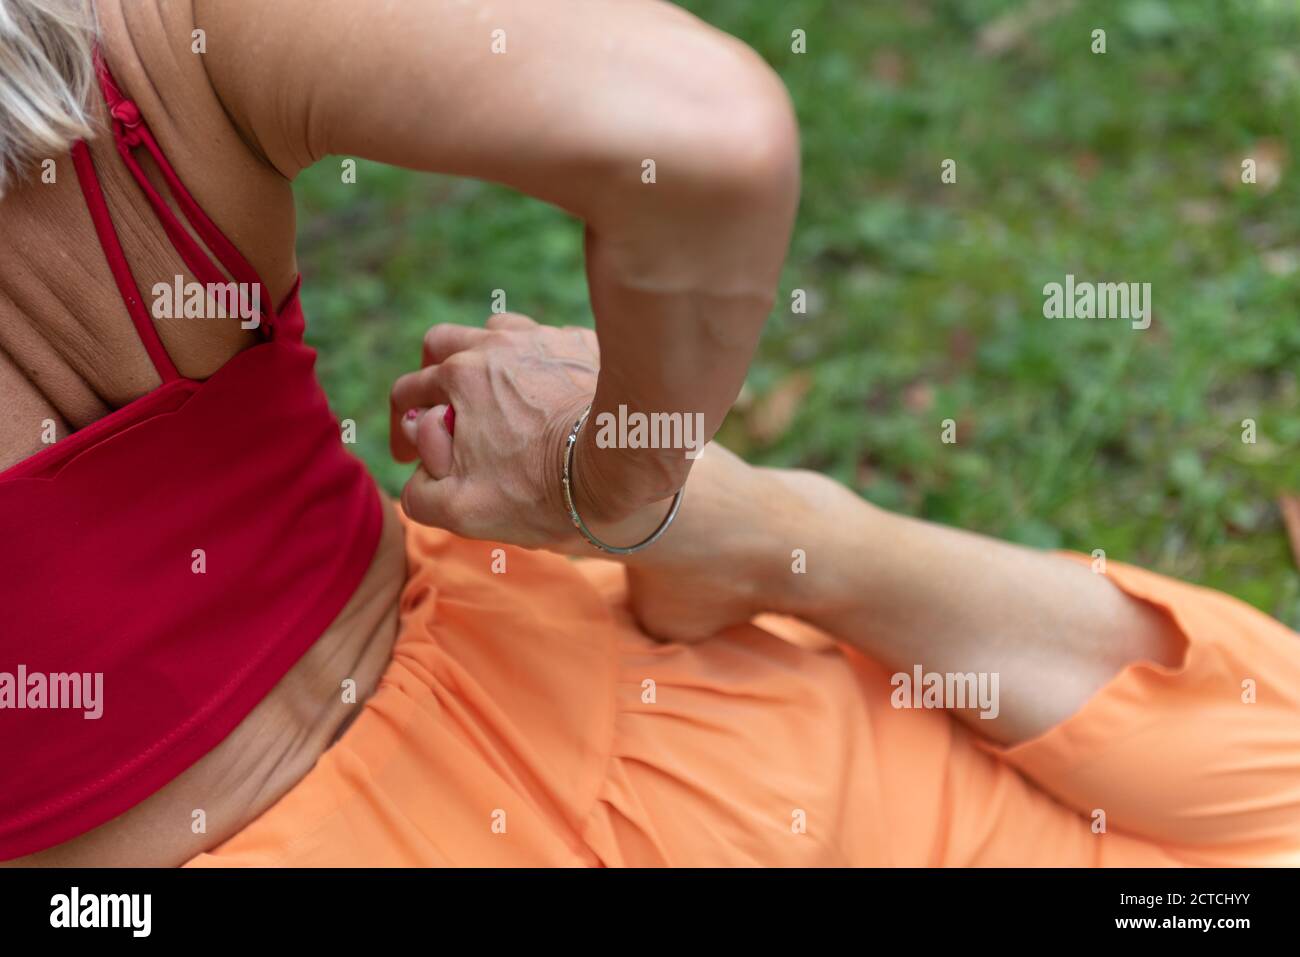 Woman practicing yoga in nature. Part of the body. Arm and leg in the foreground. Performs a pigeon pose and further stretches your quads. Stock Photo